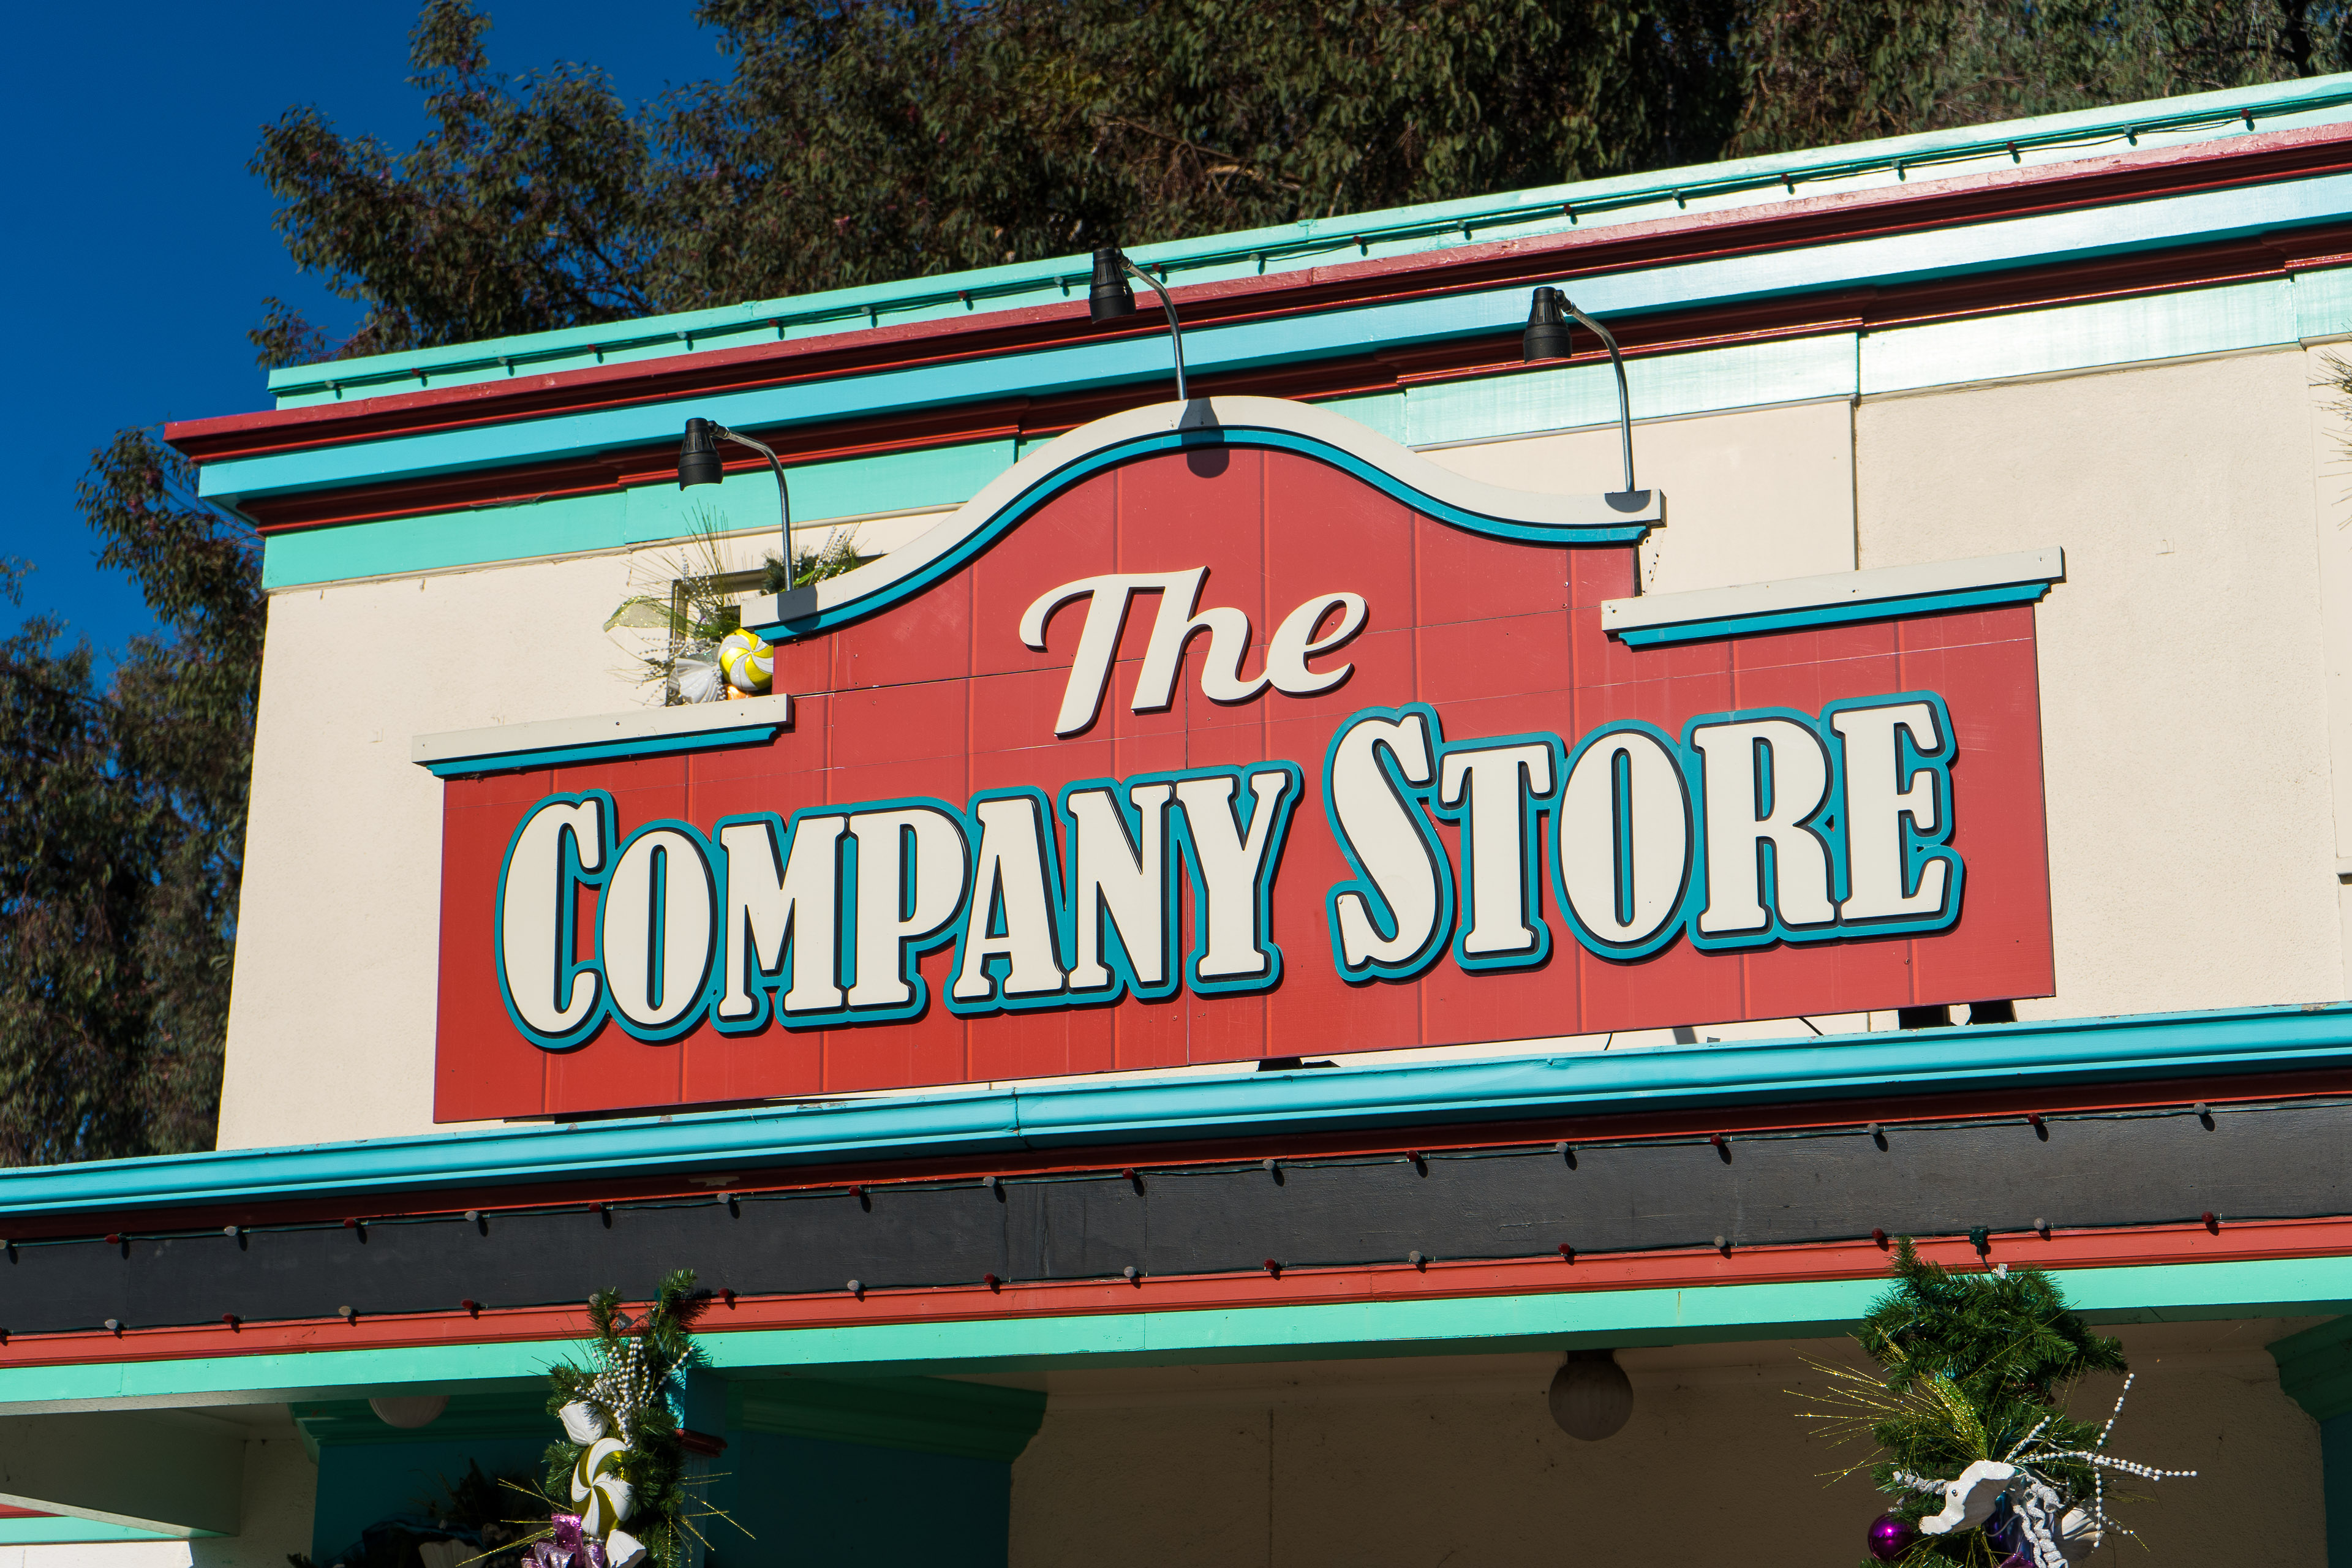 The Company Store